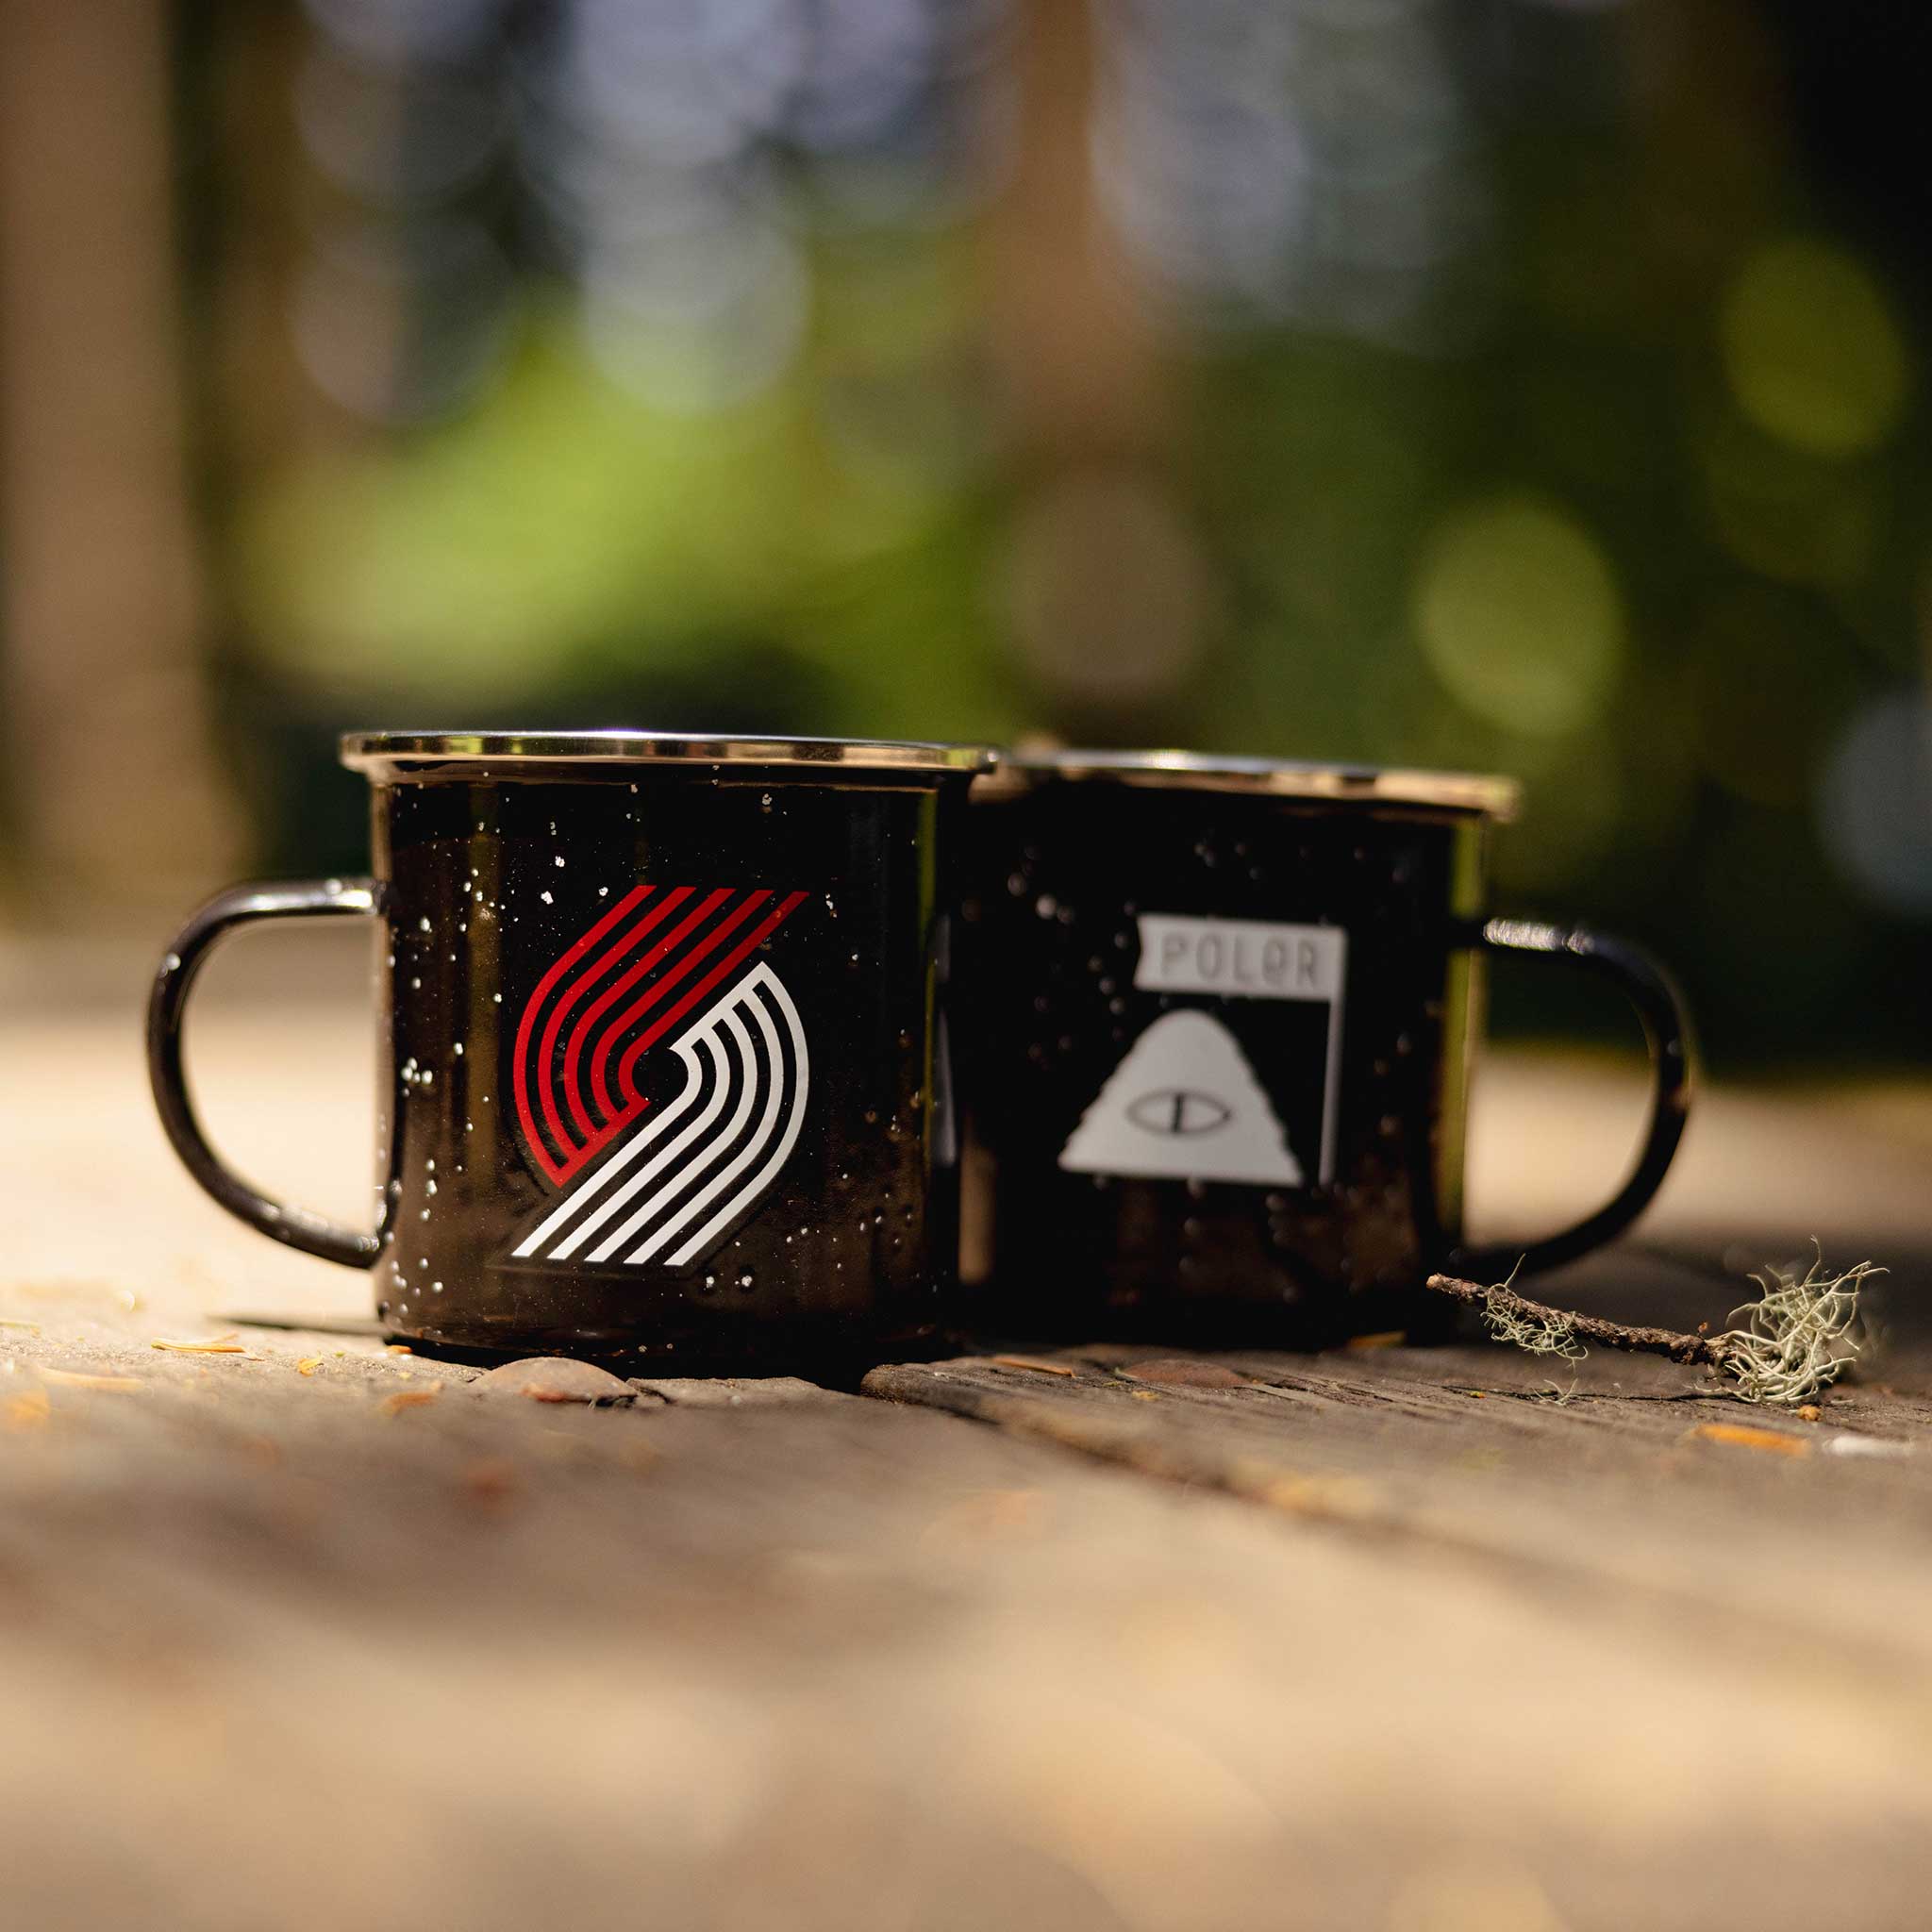 Outdoor Adventures with the Portland Trail Blazers Poler Camping Mug